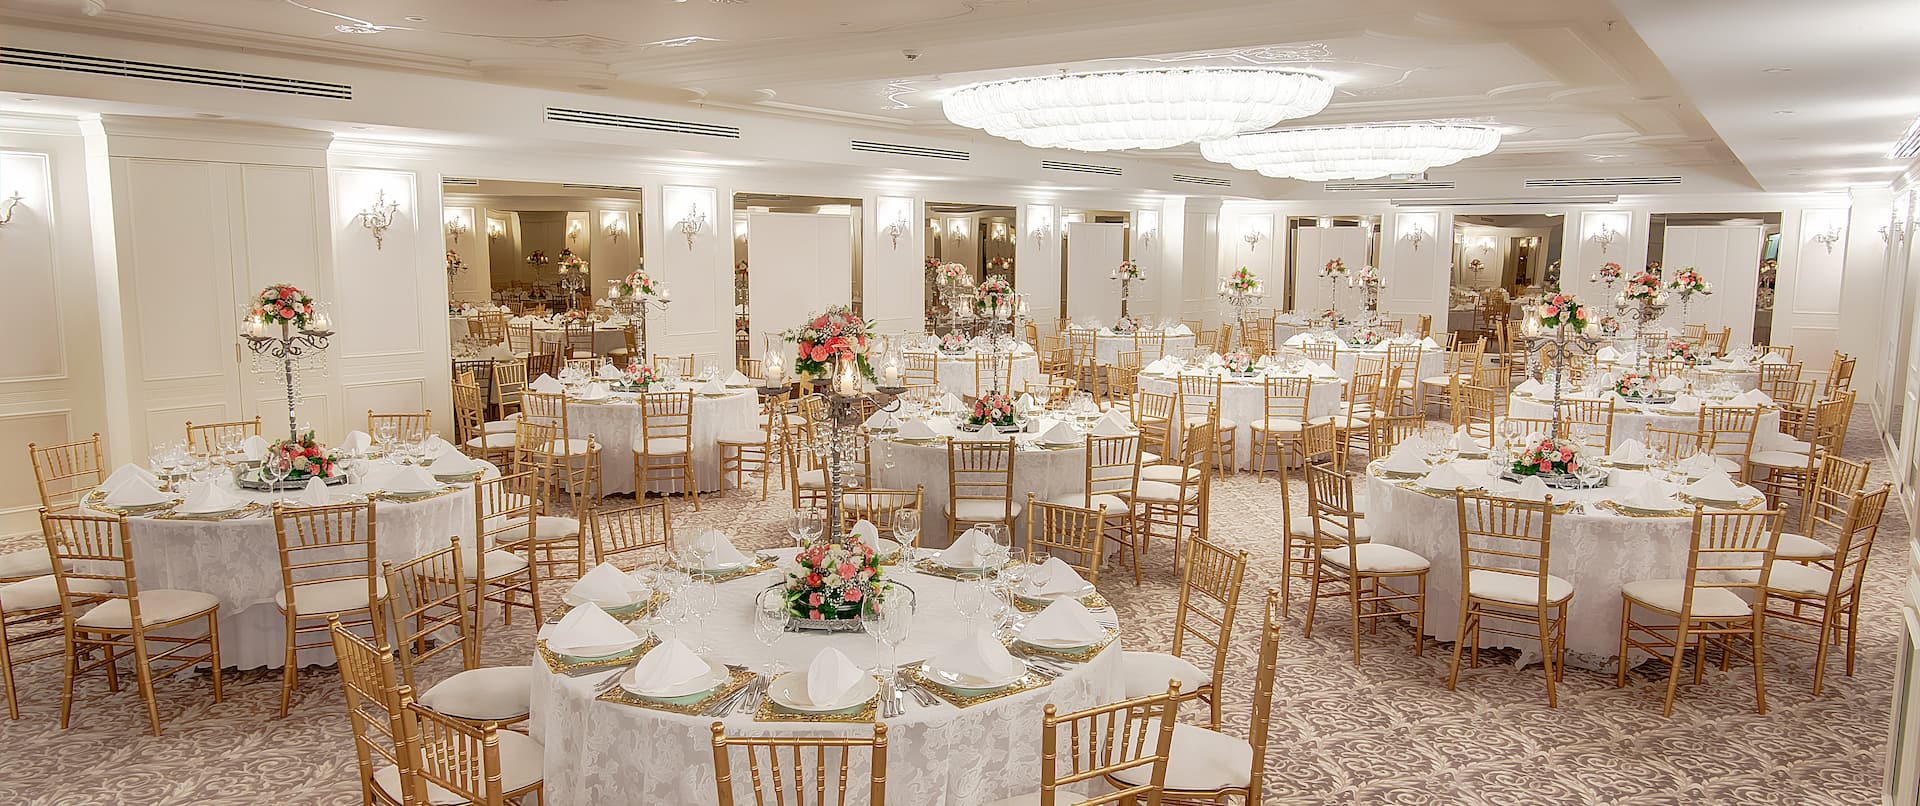 Meeting Room Wedding Reception Setup with Round Tables and Chairs